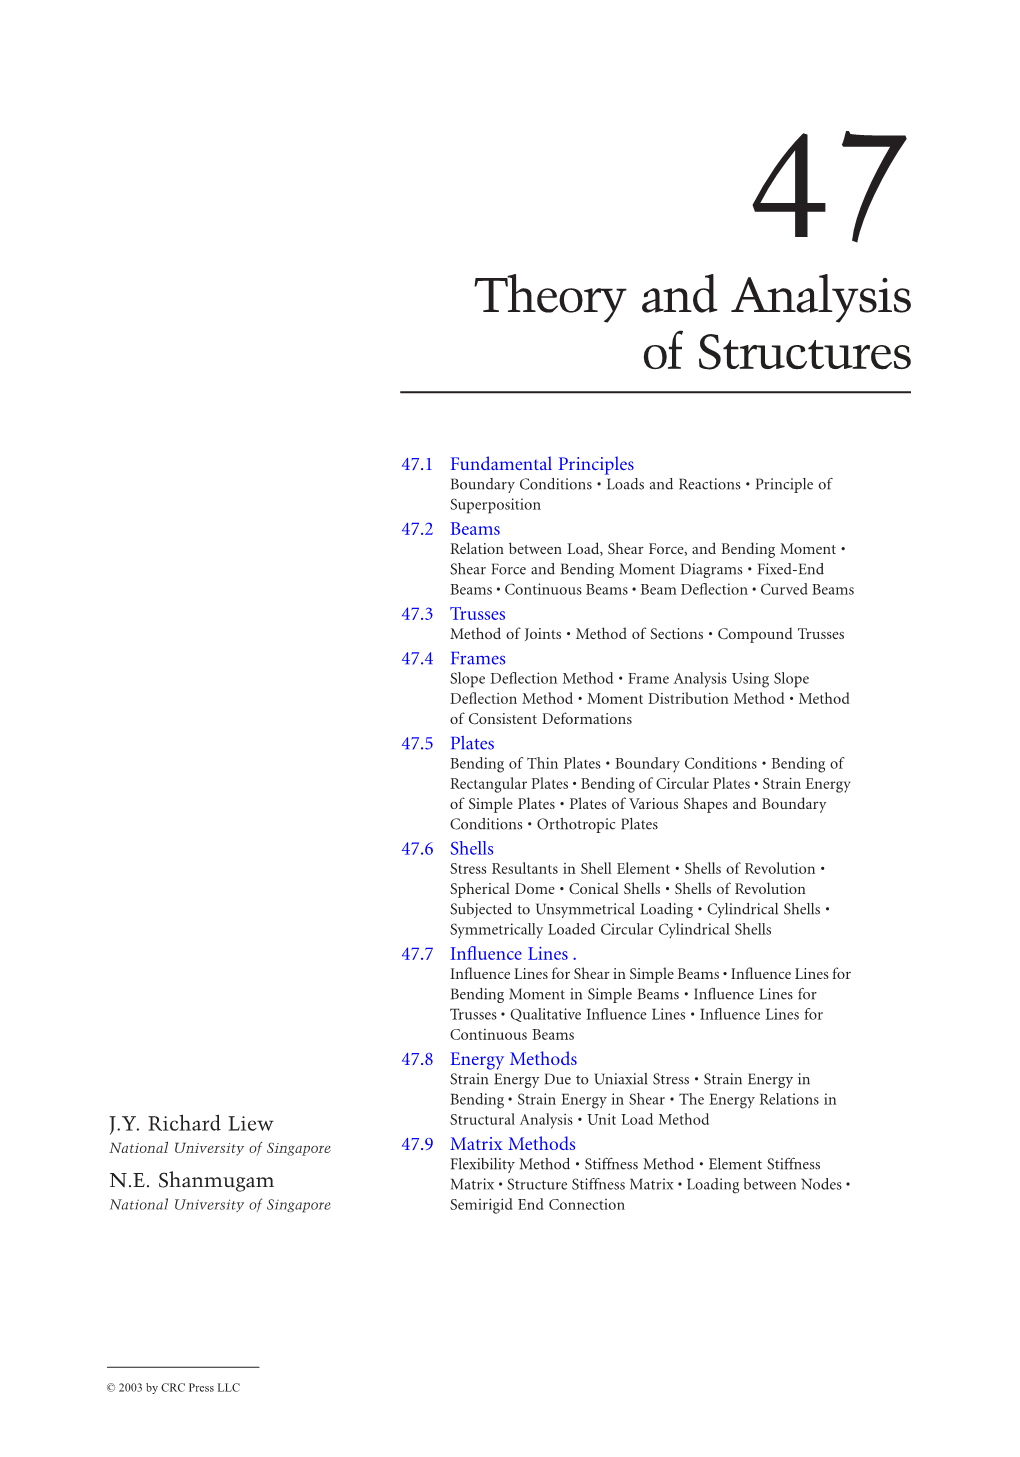 Chapter 47: Theory and Analysis of Structures